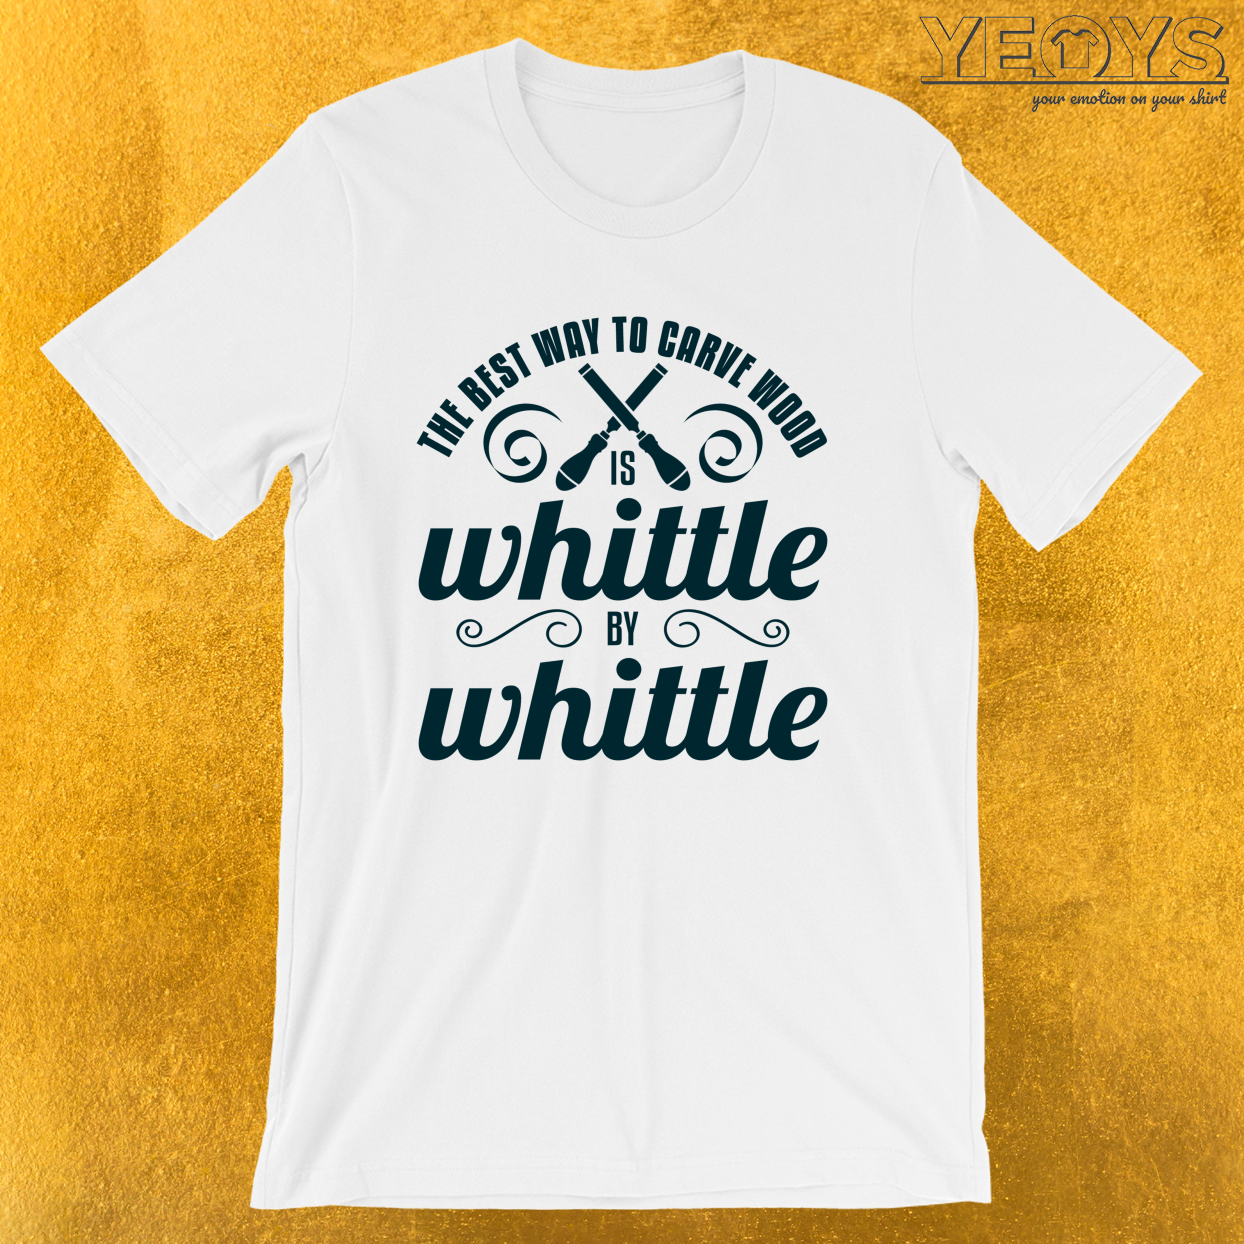 Best Way To Carve Wood Is Whittle By Whittle – Whittle Wood Tee